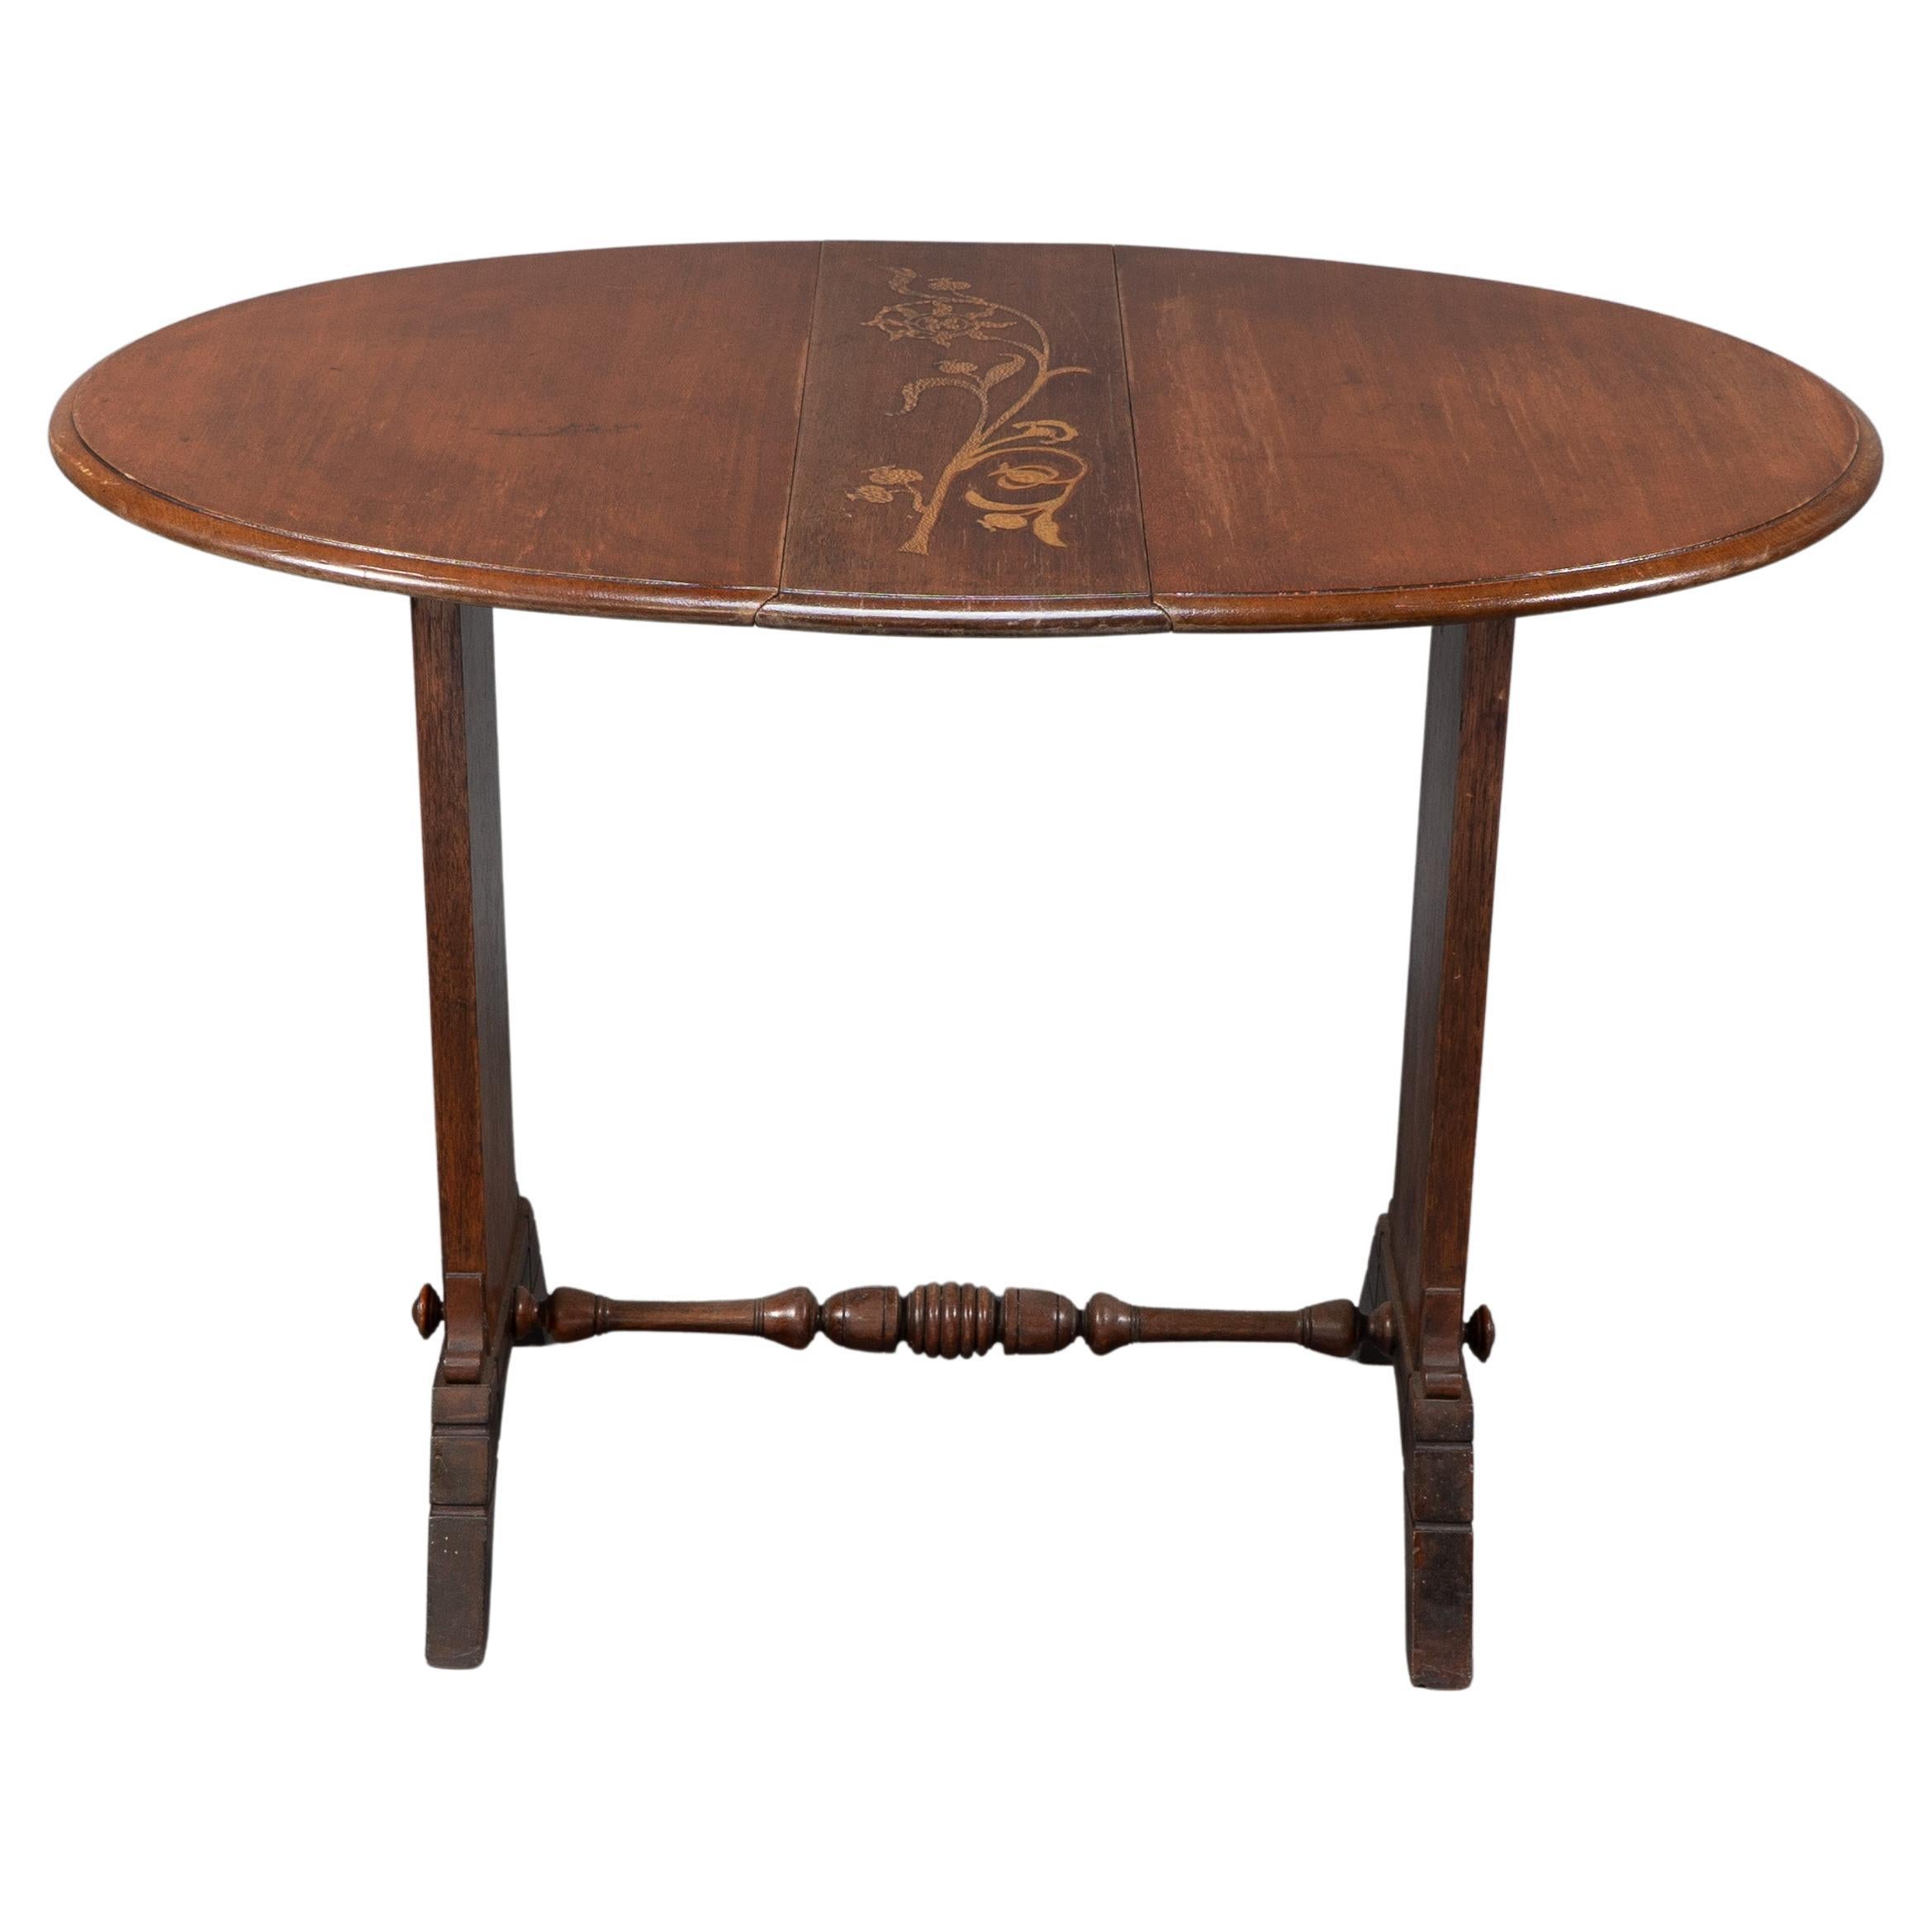 Thomas Jeckyll attributed. A subtle Anglo-Japanese style drop leaf oak occasional table, the oval top inlaid with a single flowing flower to the central panel, and a single flower rising from a planter in the Japanese style to both sides. The angled